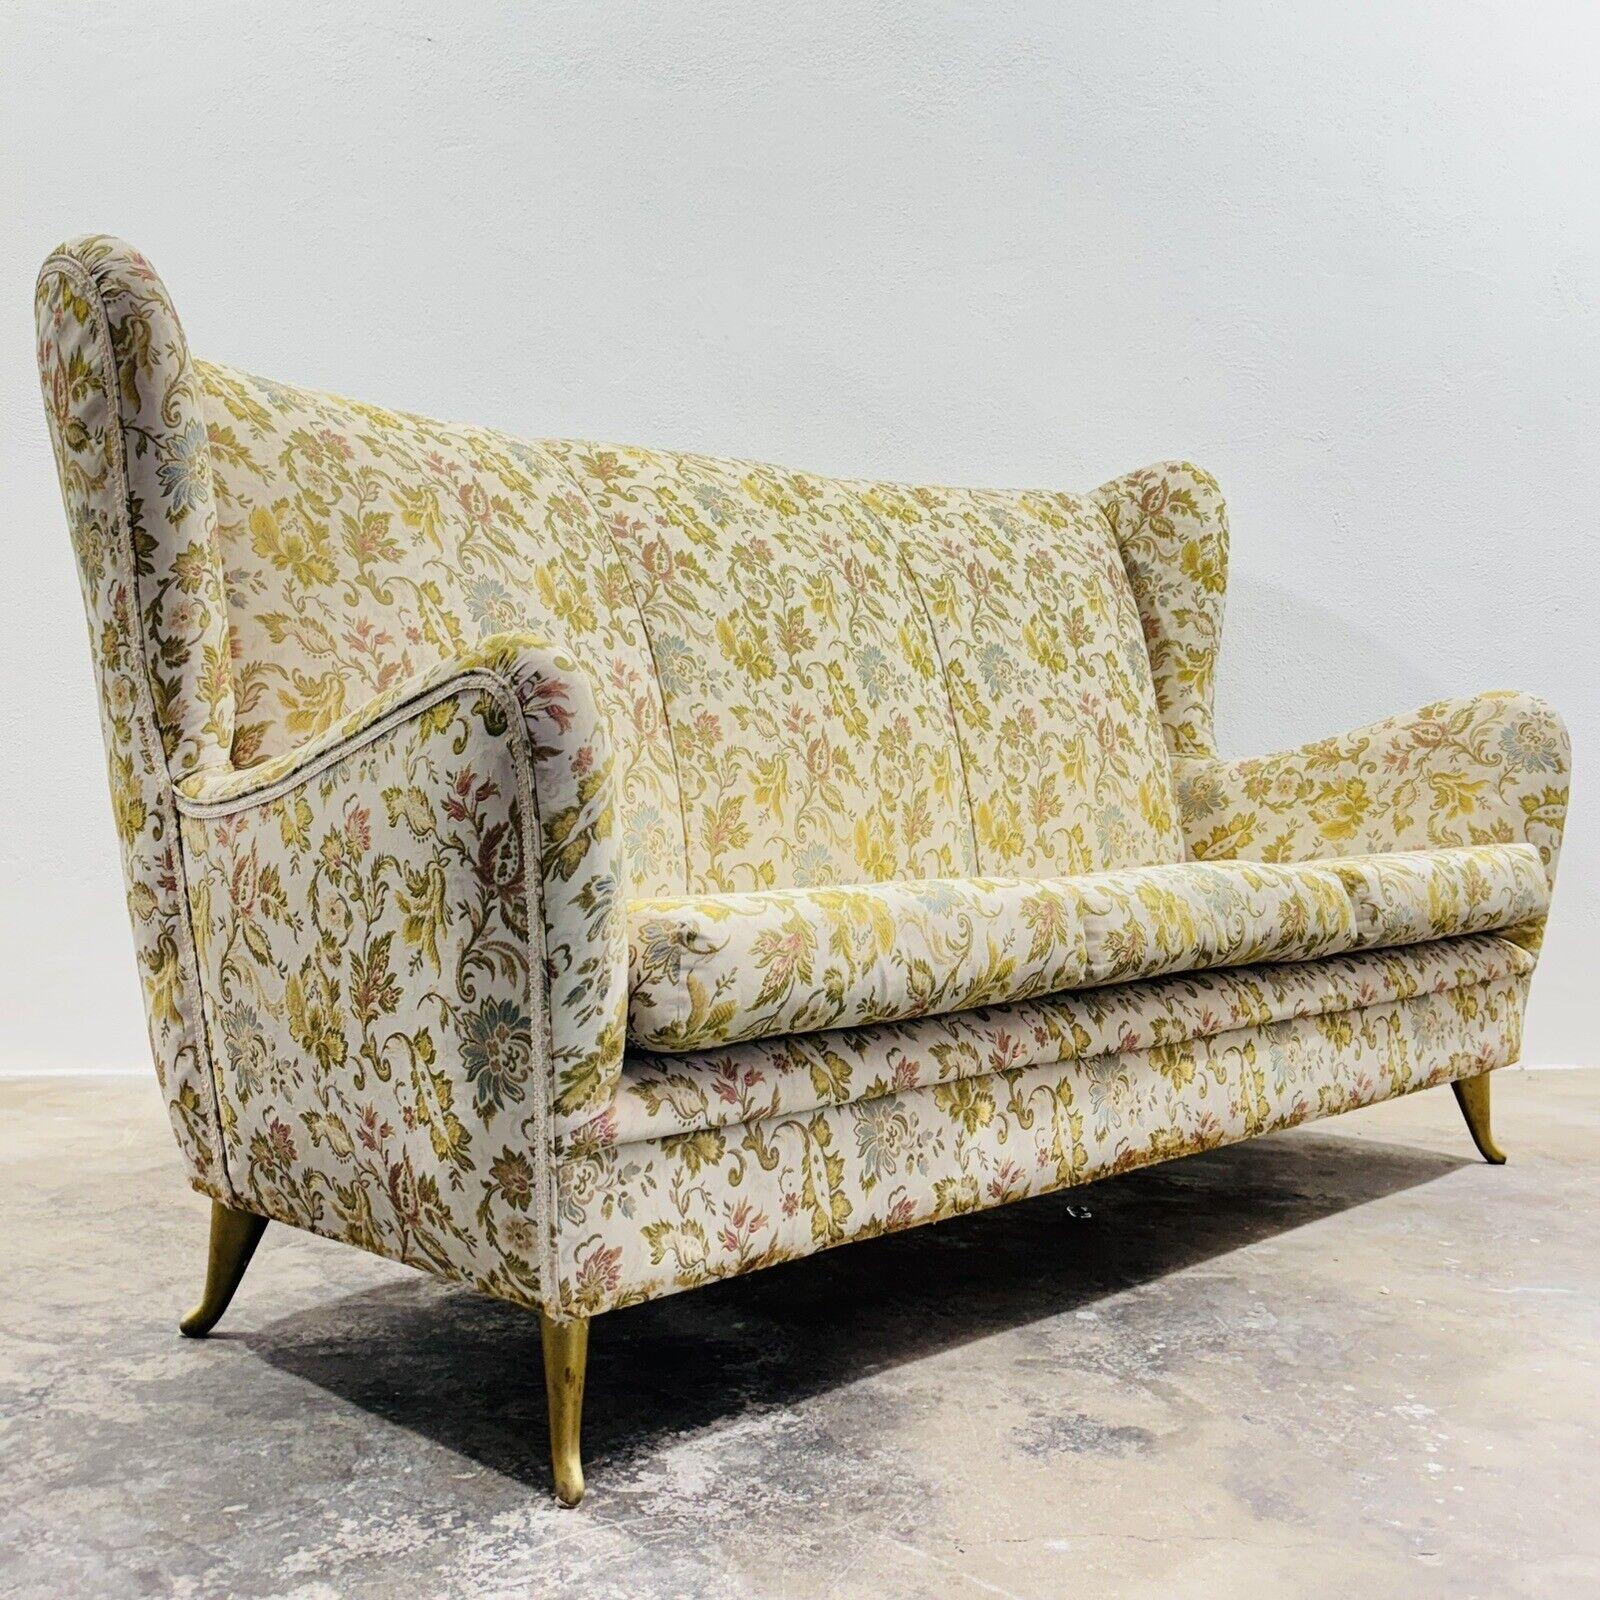 Wonderful three-seater sofa designed by Gio ponti for Isa Bergamo.

Wooden frame covered in embroidered floral fabric , brass feet.

The item is in excellent conservative condition, no cosmetic or structural flaws to report, just slight and obvious